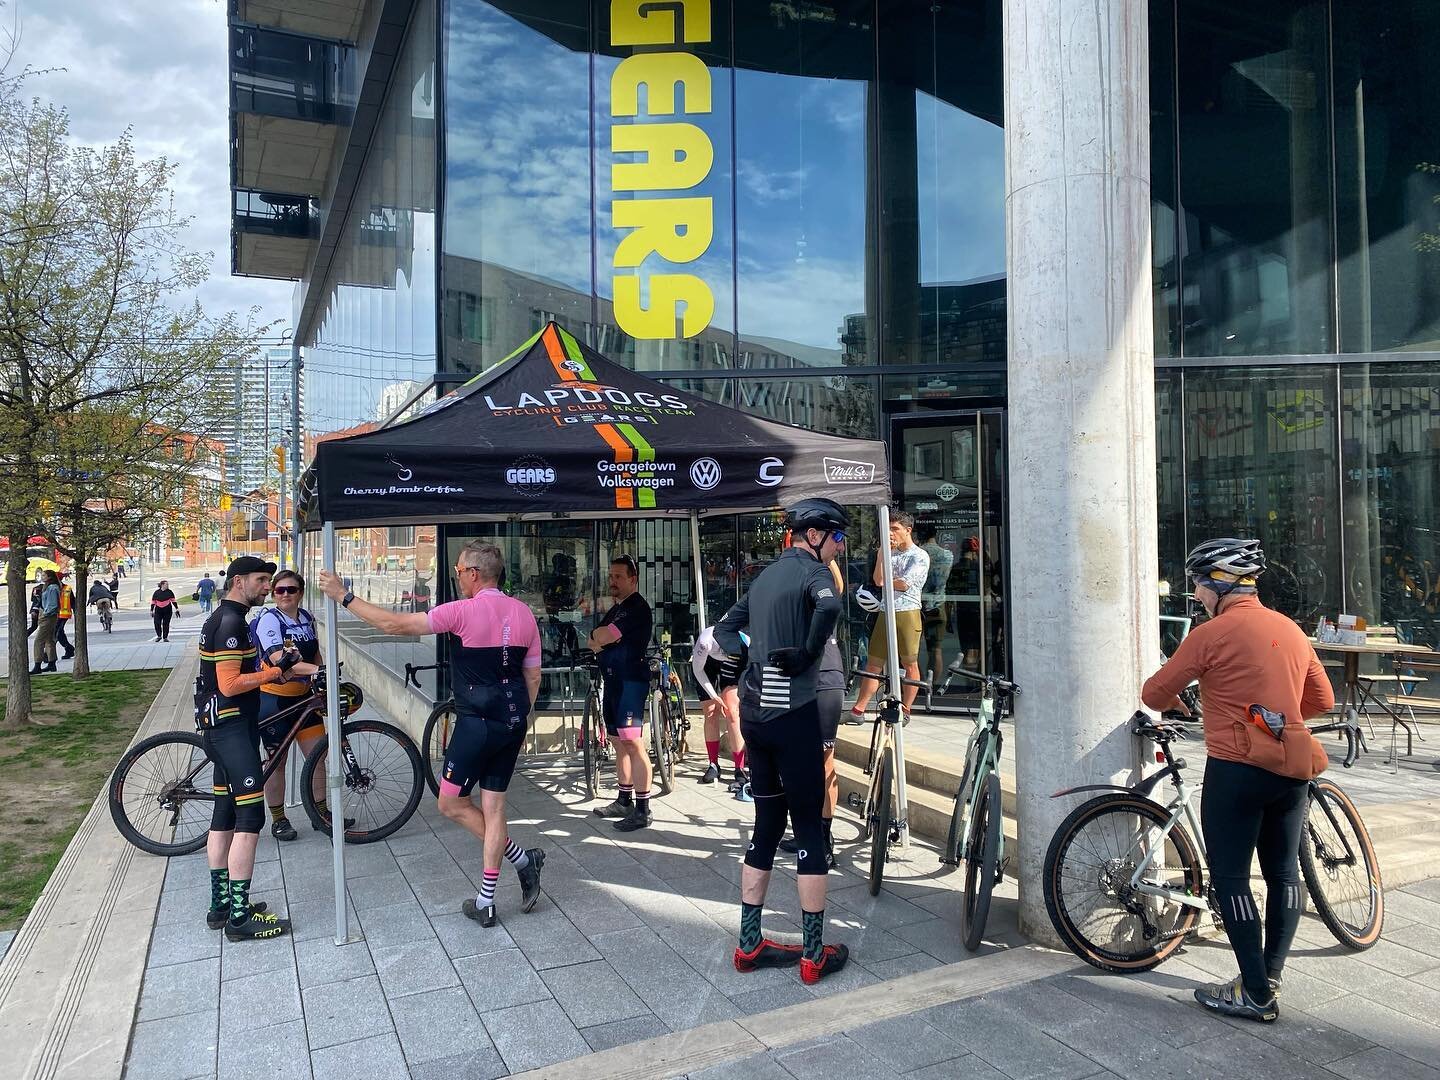 LapDog are gathering for today&rsquo;s Gravel 101 at @gearsbikeshop. A little chat first and then we&rsquo;ll head up to the Don to do some trails and have a little fun.